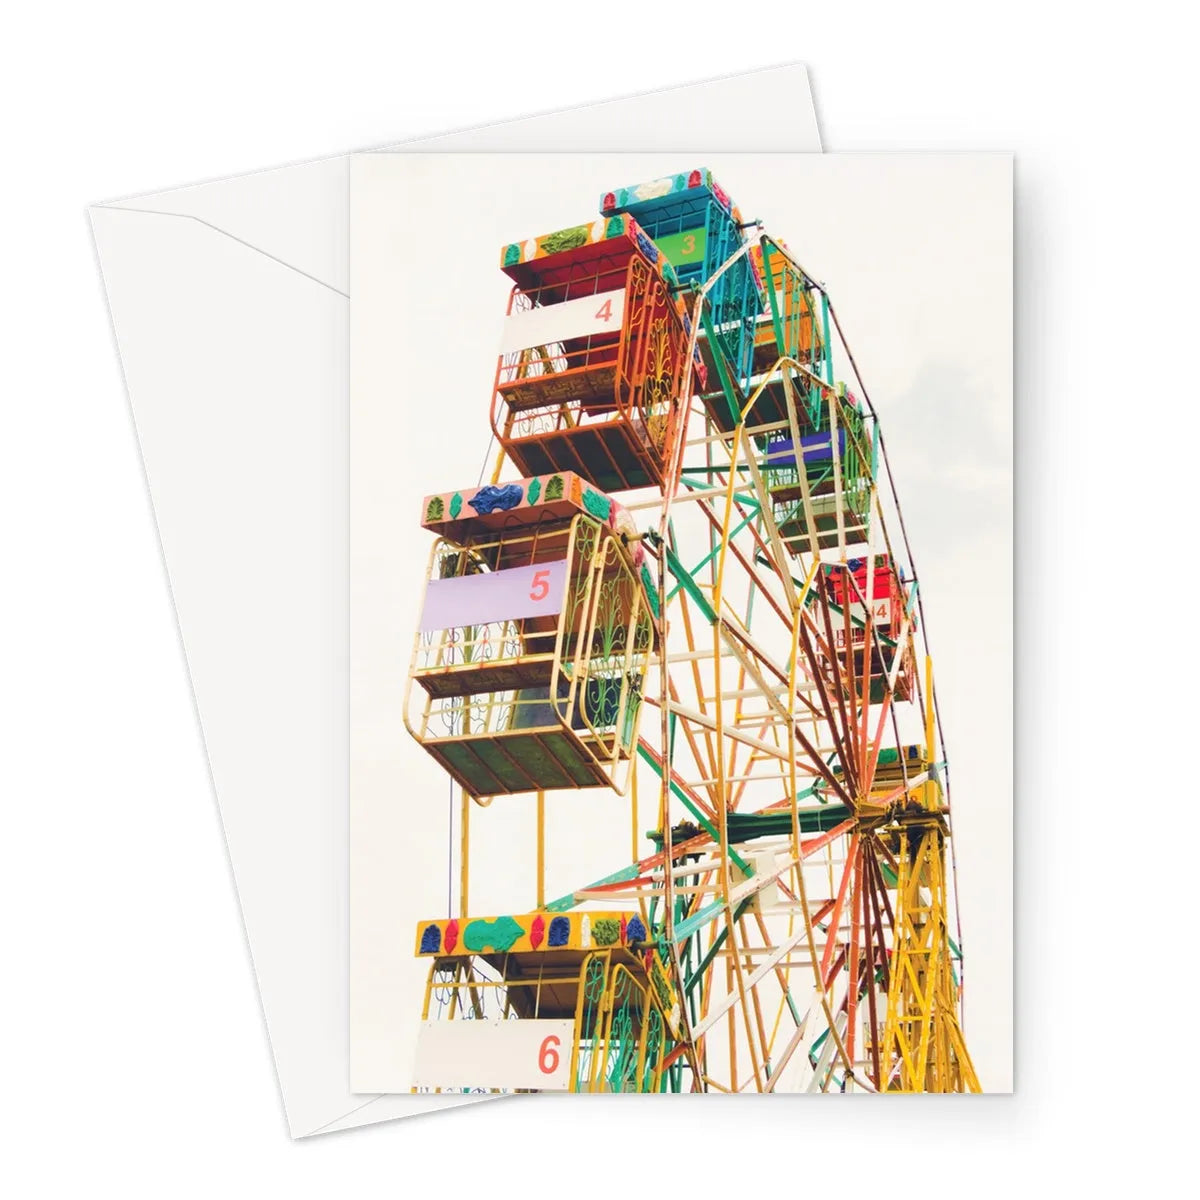 Wheel Of Fortune Greeting Card - A5 Portrait / 1 Card - Greeting & Note Cards - Aesthetic Art